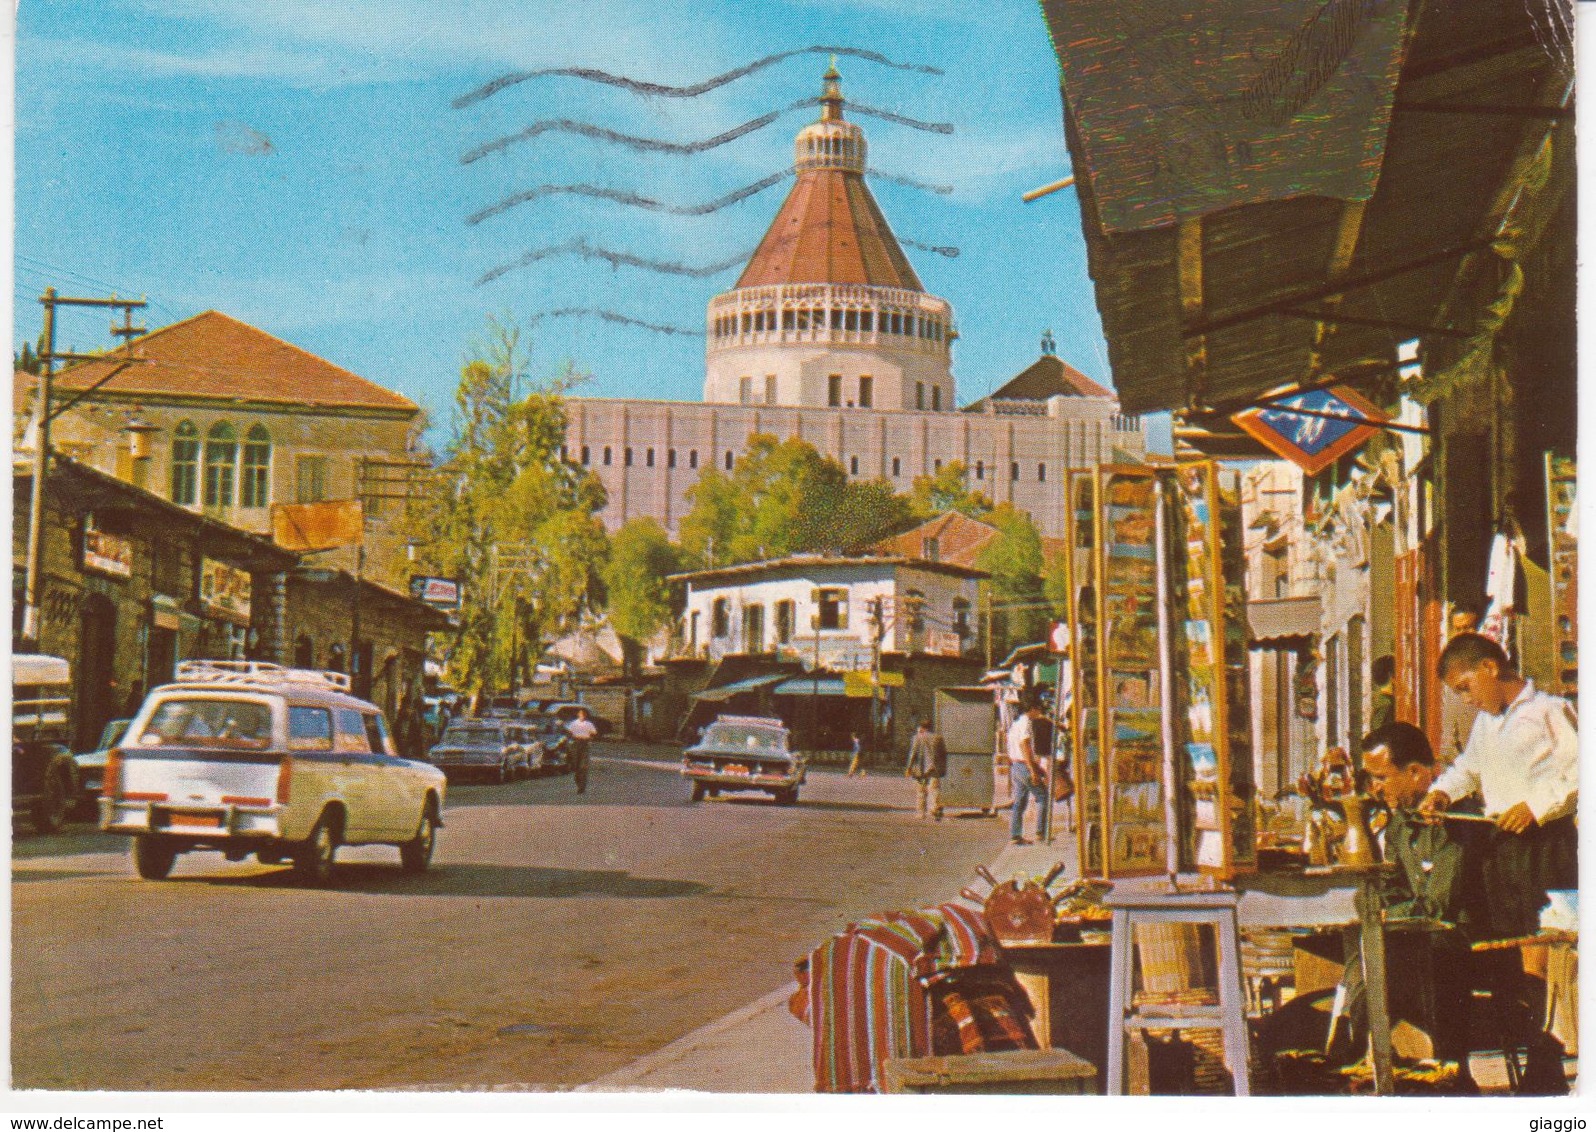 °°° 13420 - ISRAEL - NAZARETH - PARTIAL VIEW WITH THE NEW CHURCH OF ANNUNCIATION - 1988 With Stamps °°° - Israele